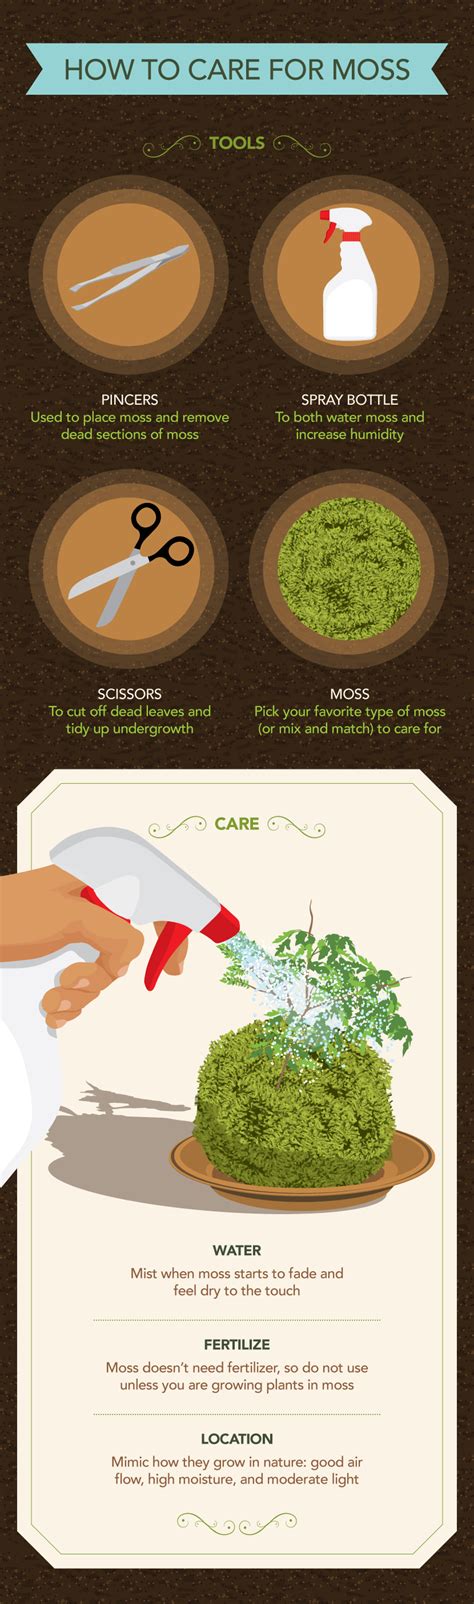 The Benefits Of Moss In Your Garden Add Some Character To Your Garden